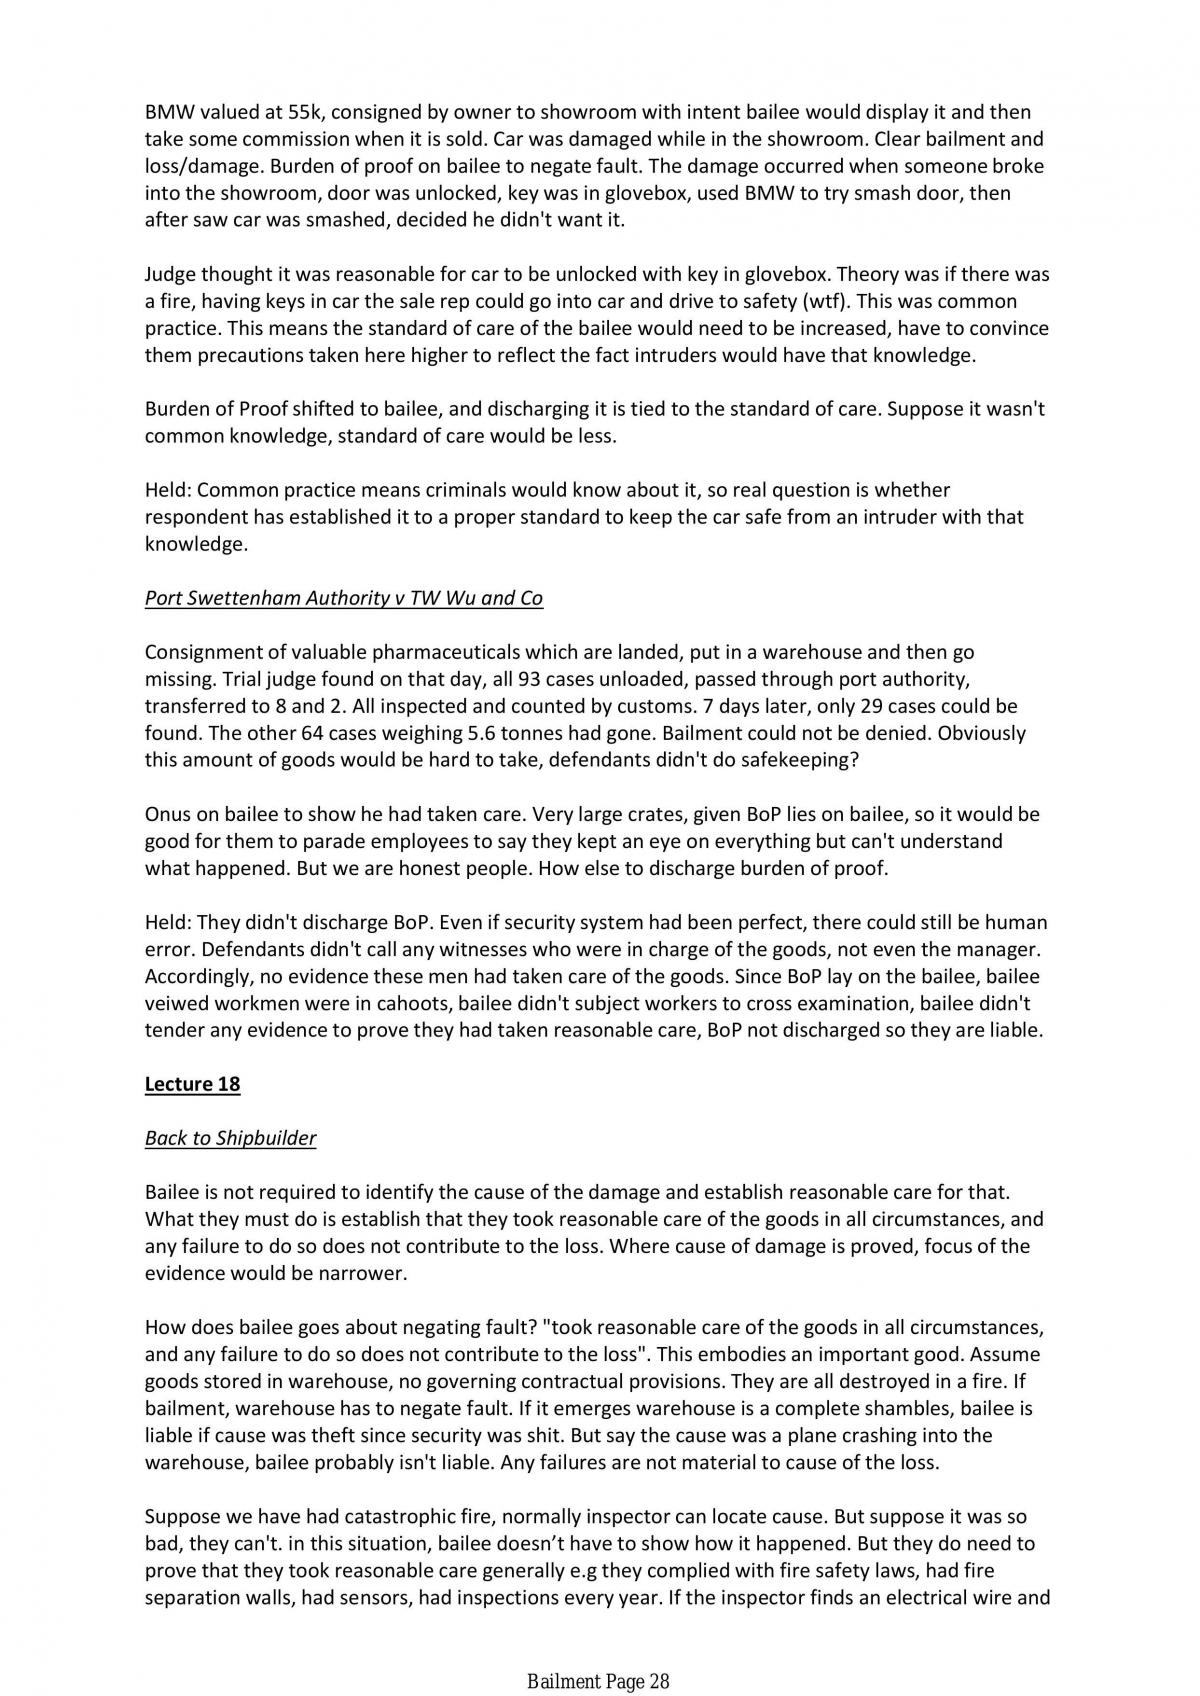 Law of Personal Property full subject notes - Page 28